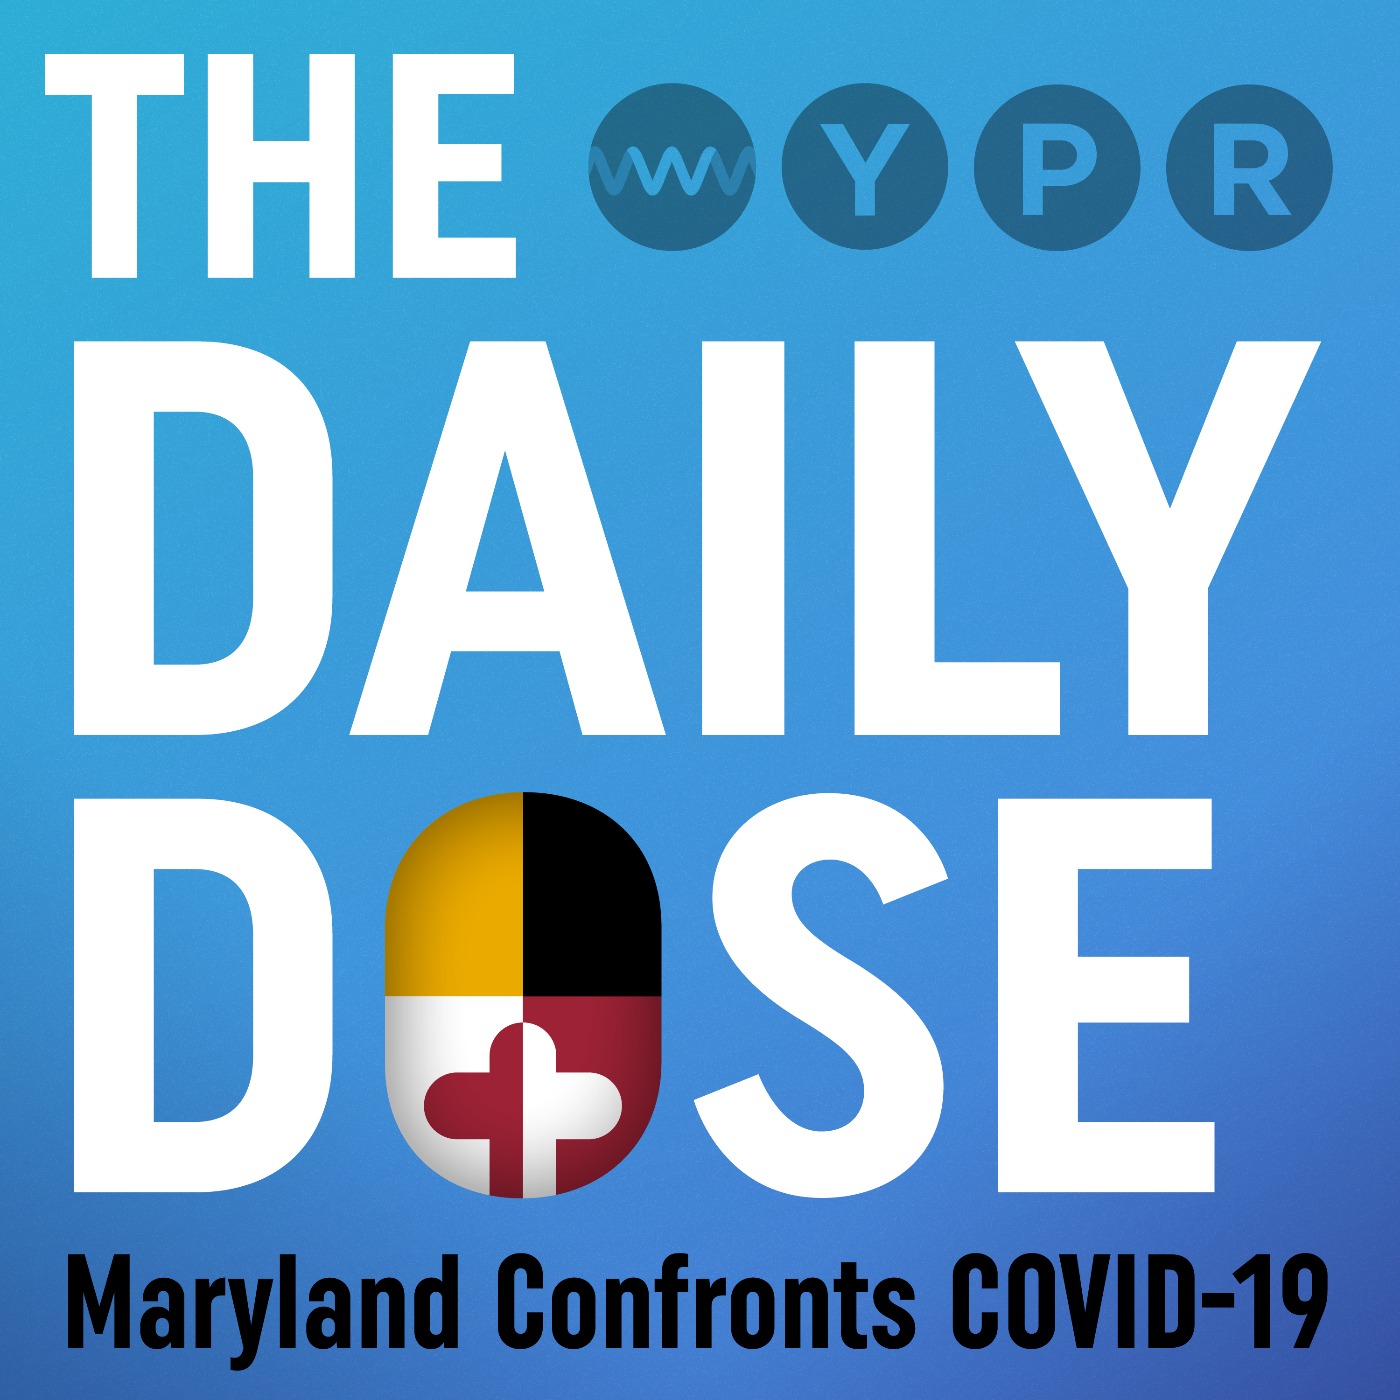 Maryland’s COVID positivity rate dips, but is still high